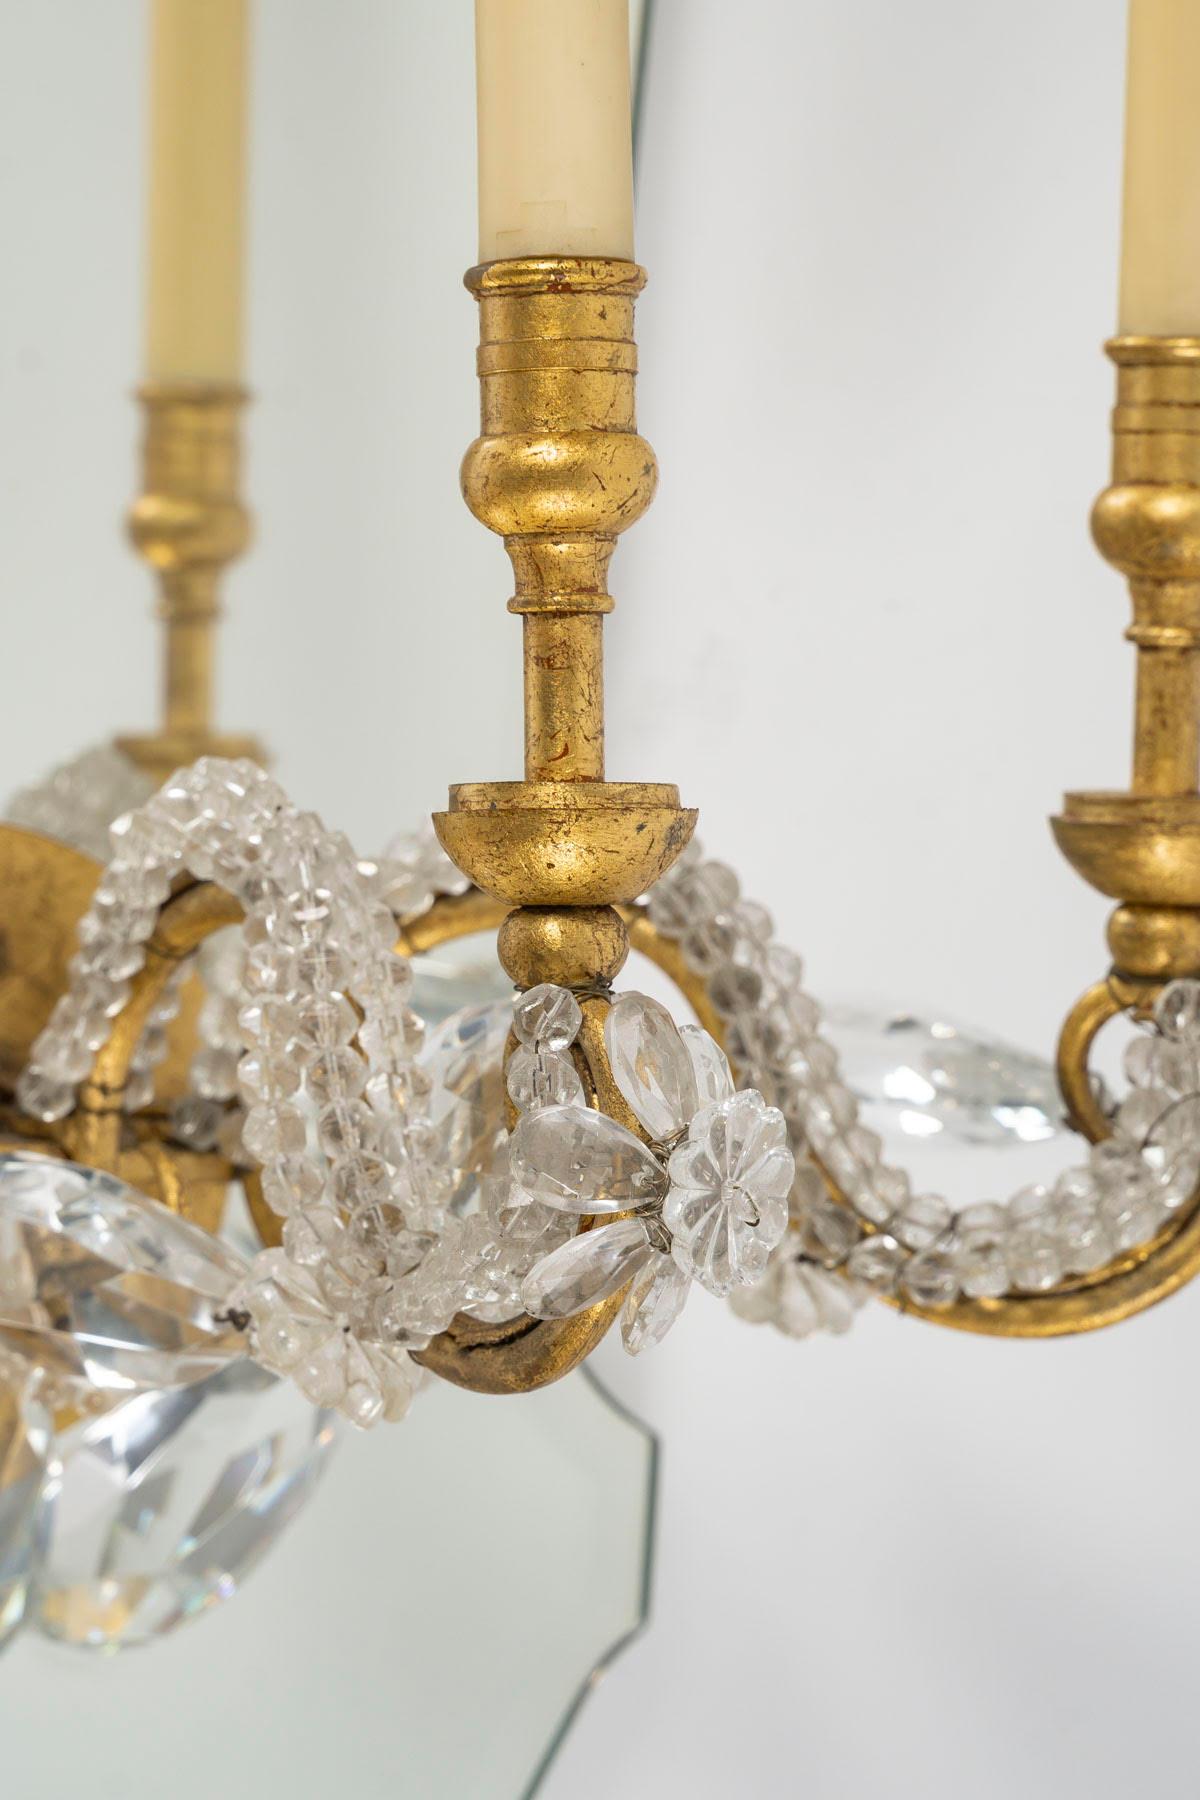 Gilt Suite of 4 Gilded Iron and Mirror Sconces with Glass Drops, 1950-1960. For Sale